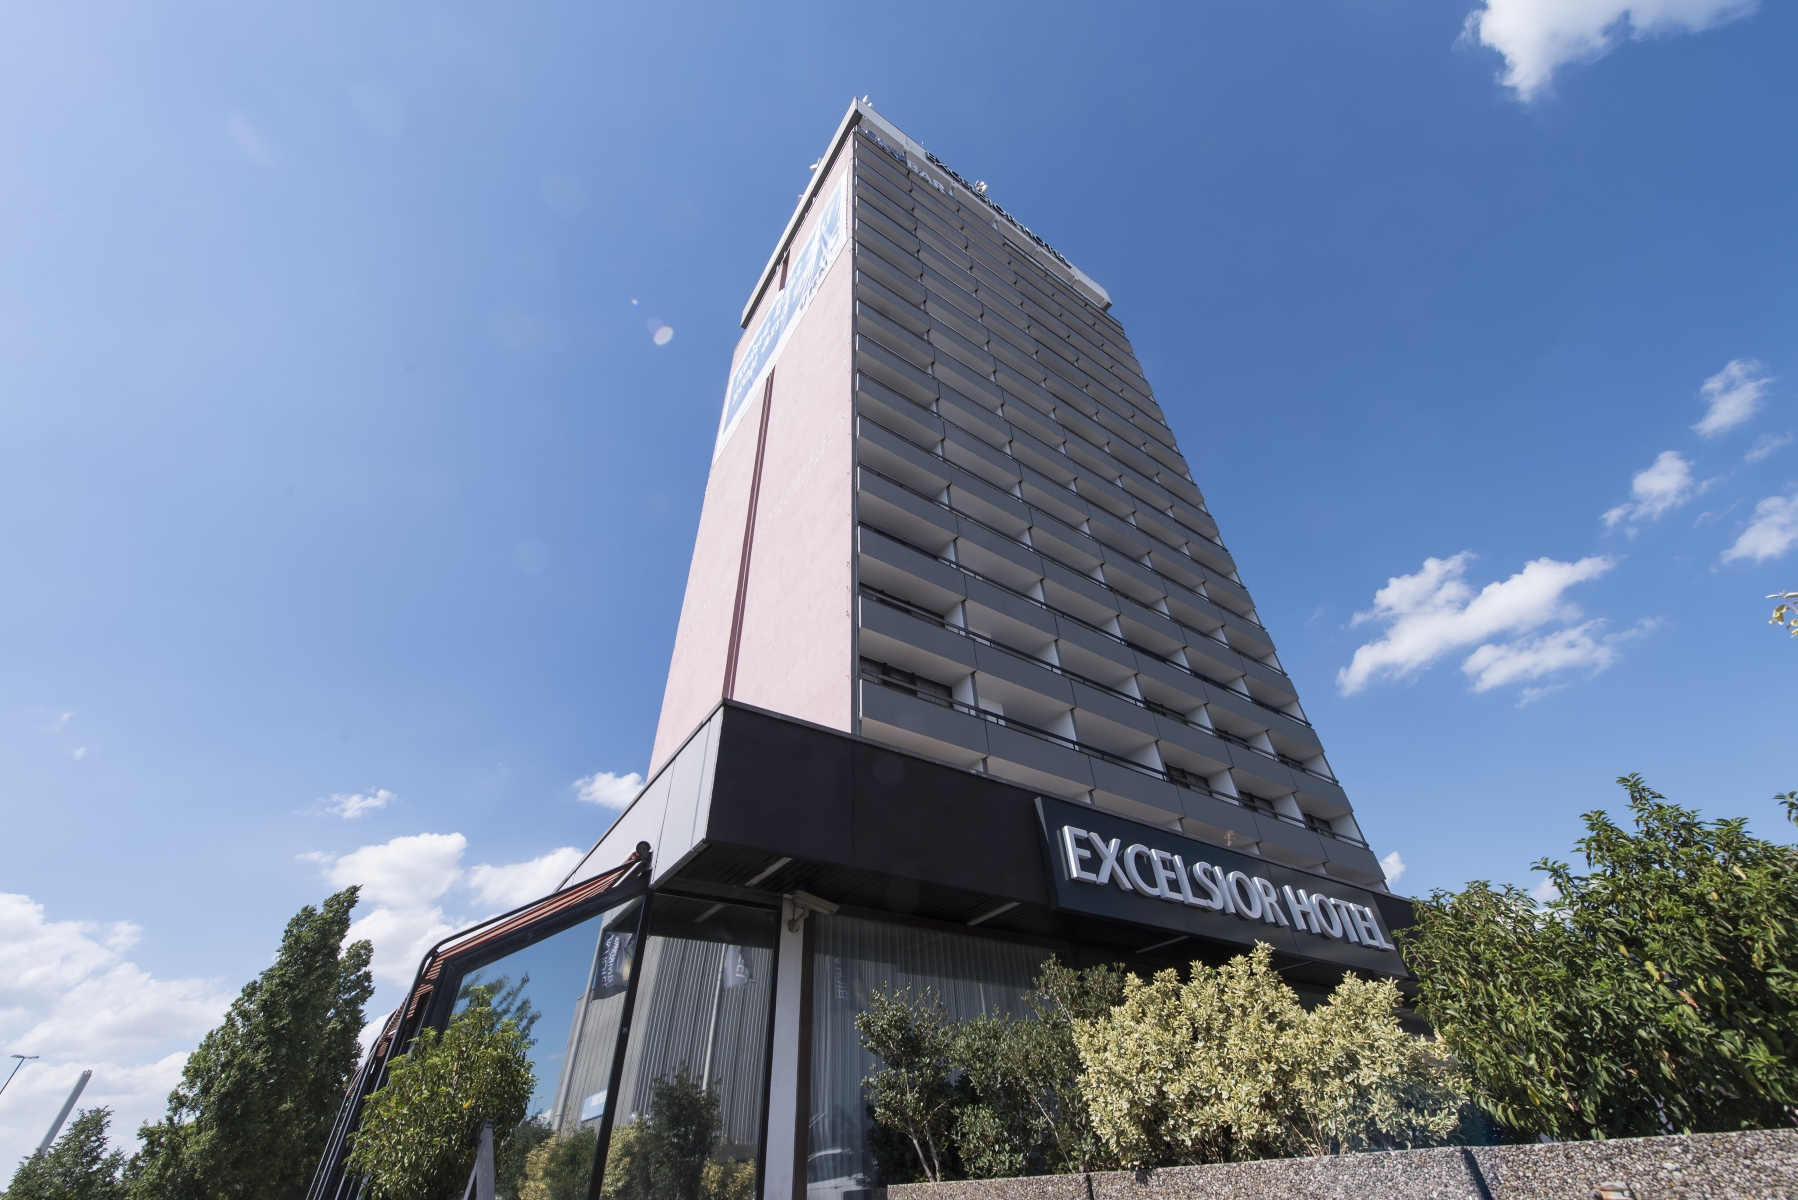 Excelsior Ludwigshafen <br/>59.00 ew <br/> <a href='http://vakantieoplossing.nl/outpage/?id=f834546f6700bfd0925d58a0629de902' target='_blank'>View Details</a>